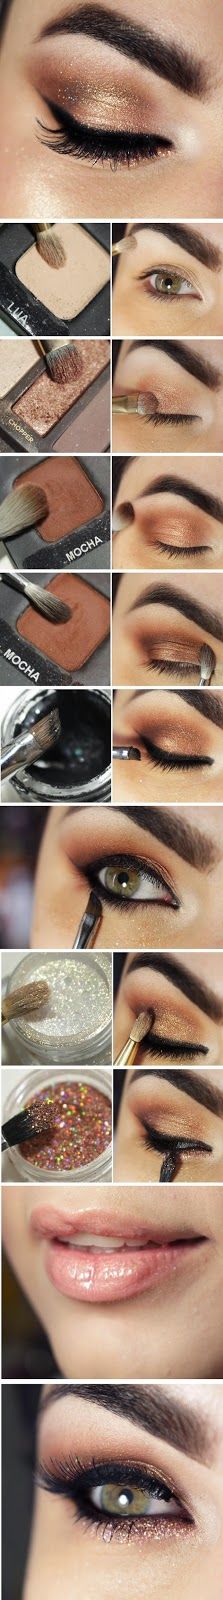 Stunning eye makeup with shimmer tutorial